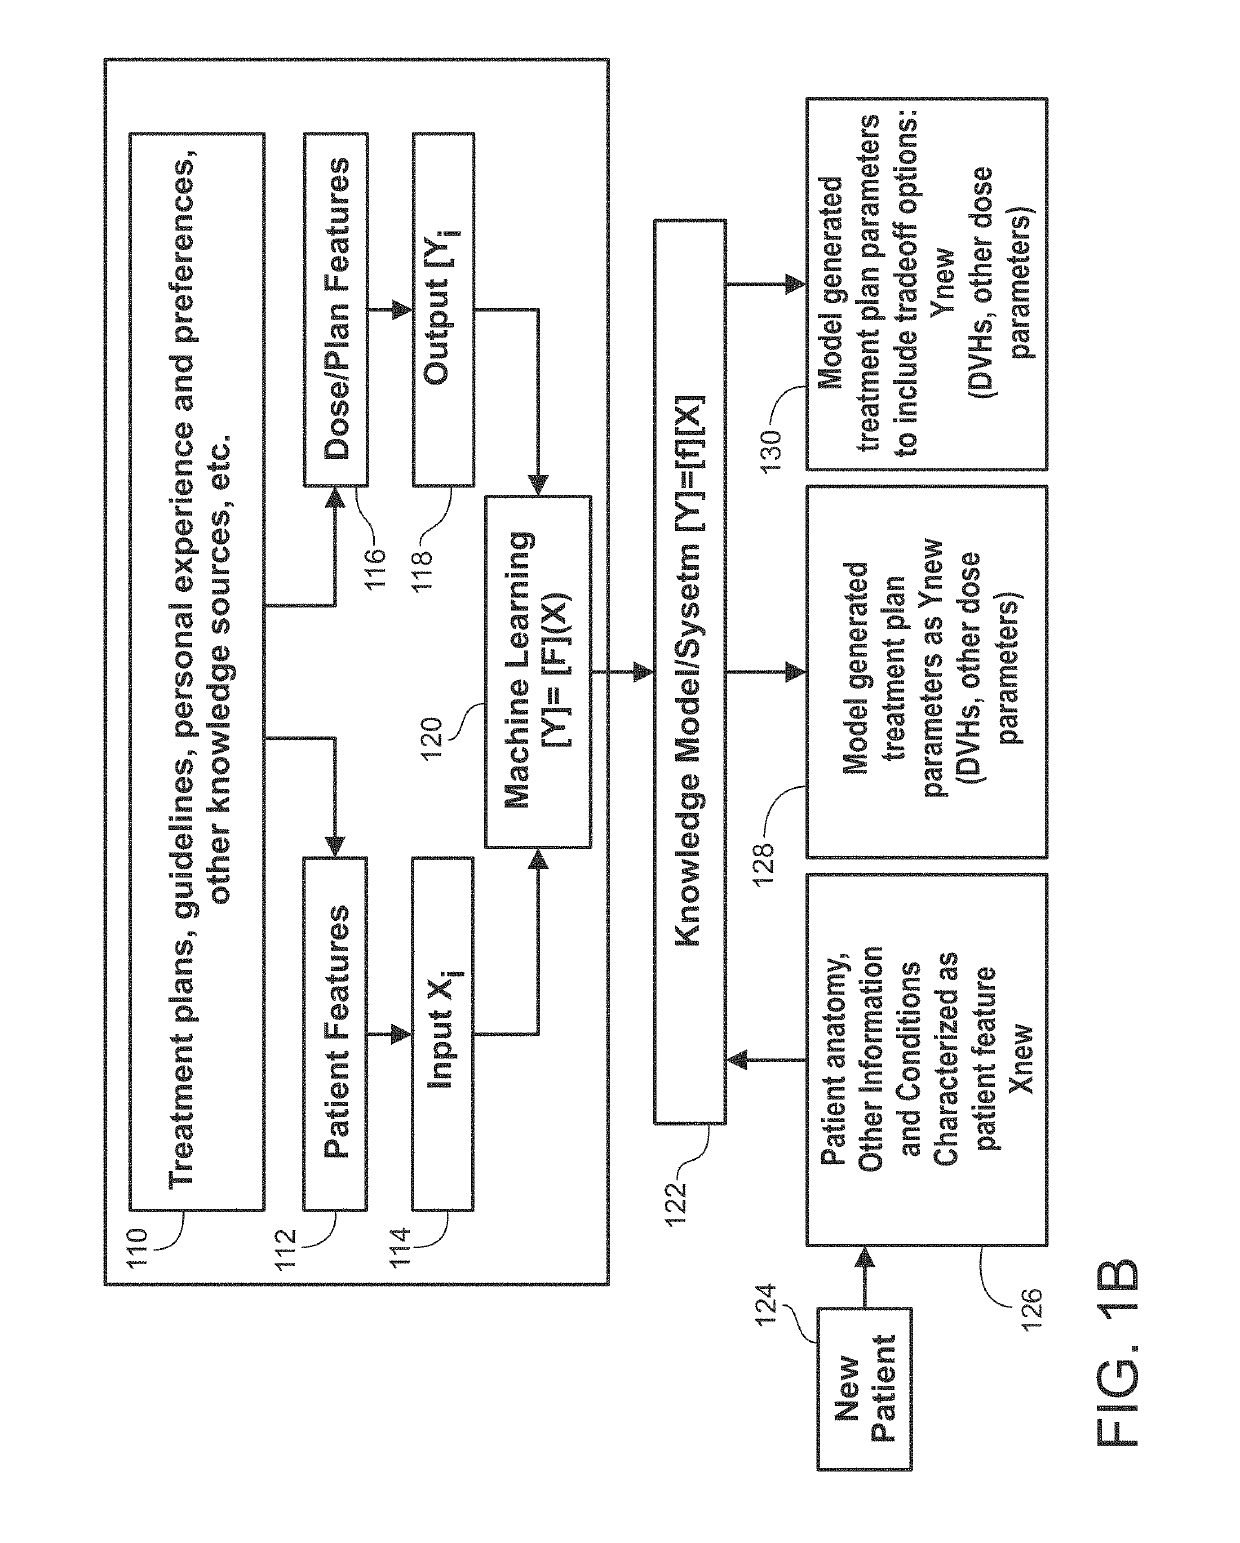 Systems and methods for specifying treatment criteria and treatment parameters for patient specific radiation therapy planning